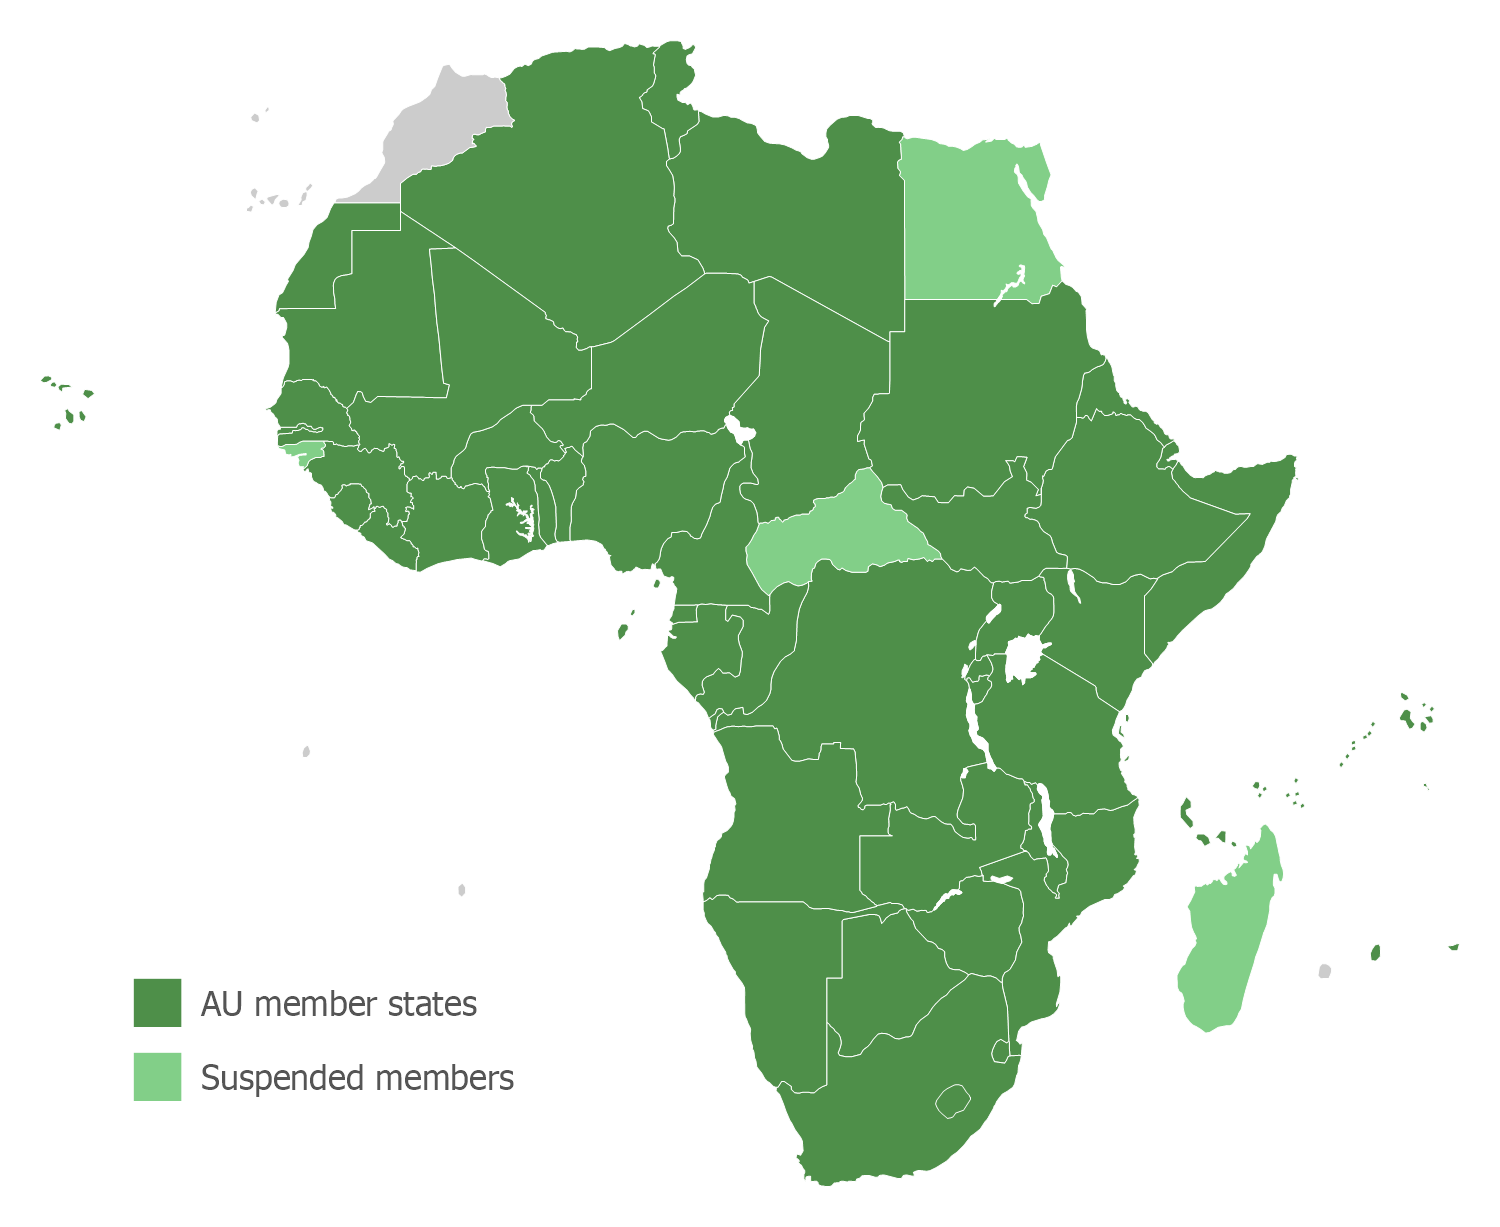 Map of the African Union with suspended states